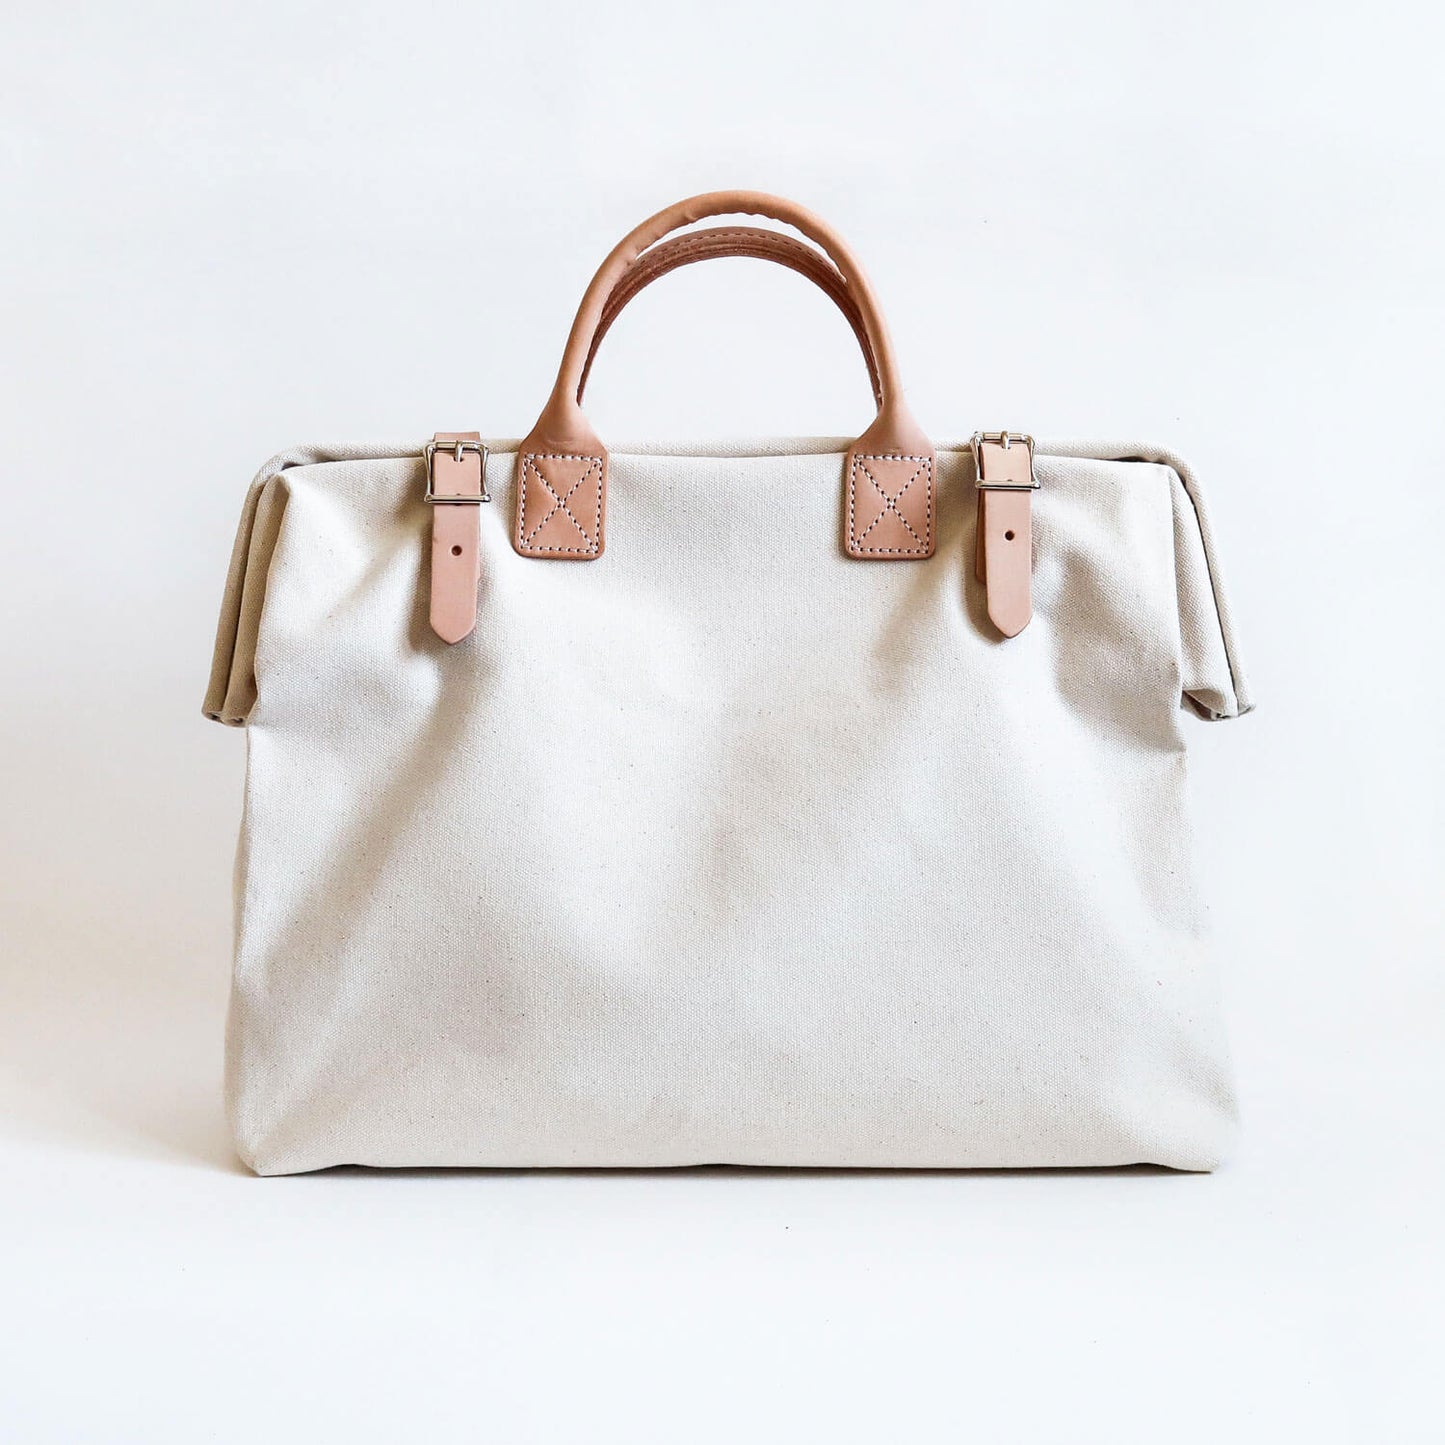 A white cotton canvas handbag with leather belted buckles with quality leather handles in between